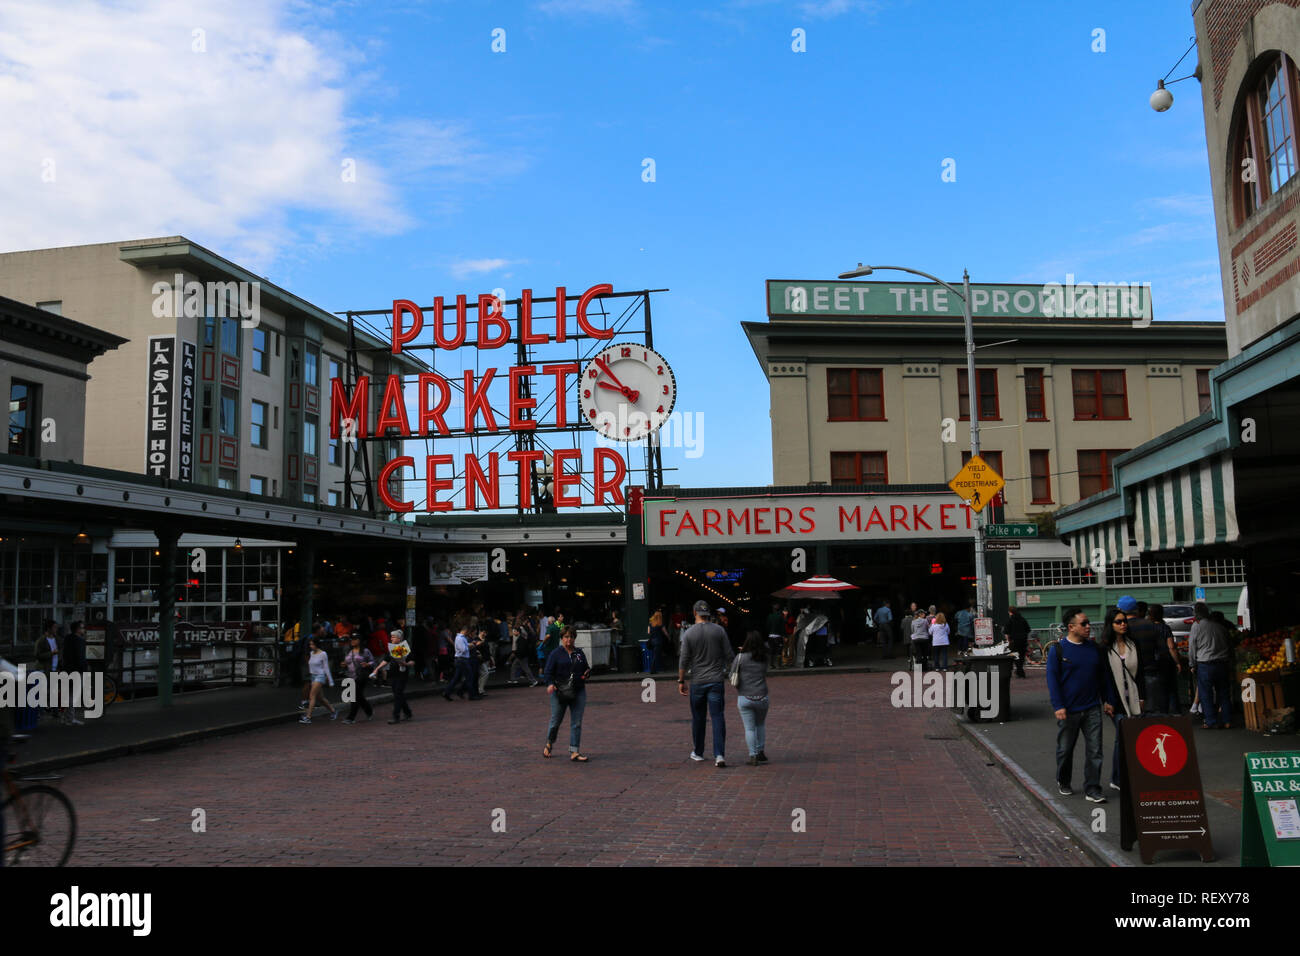 Iconic sign and entrance to the Pike Place Market in Seattle, Washington on a sunny day with blue sky and partial clouds, shoppers passing by Stock Photo